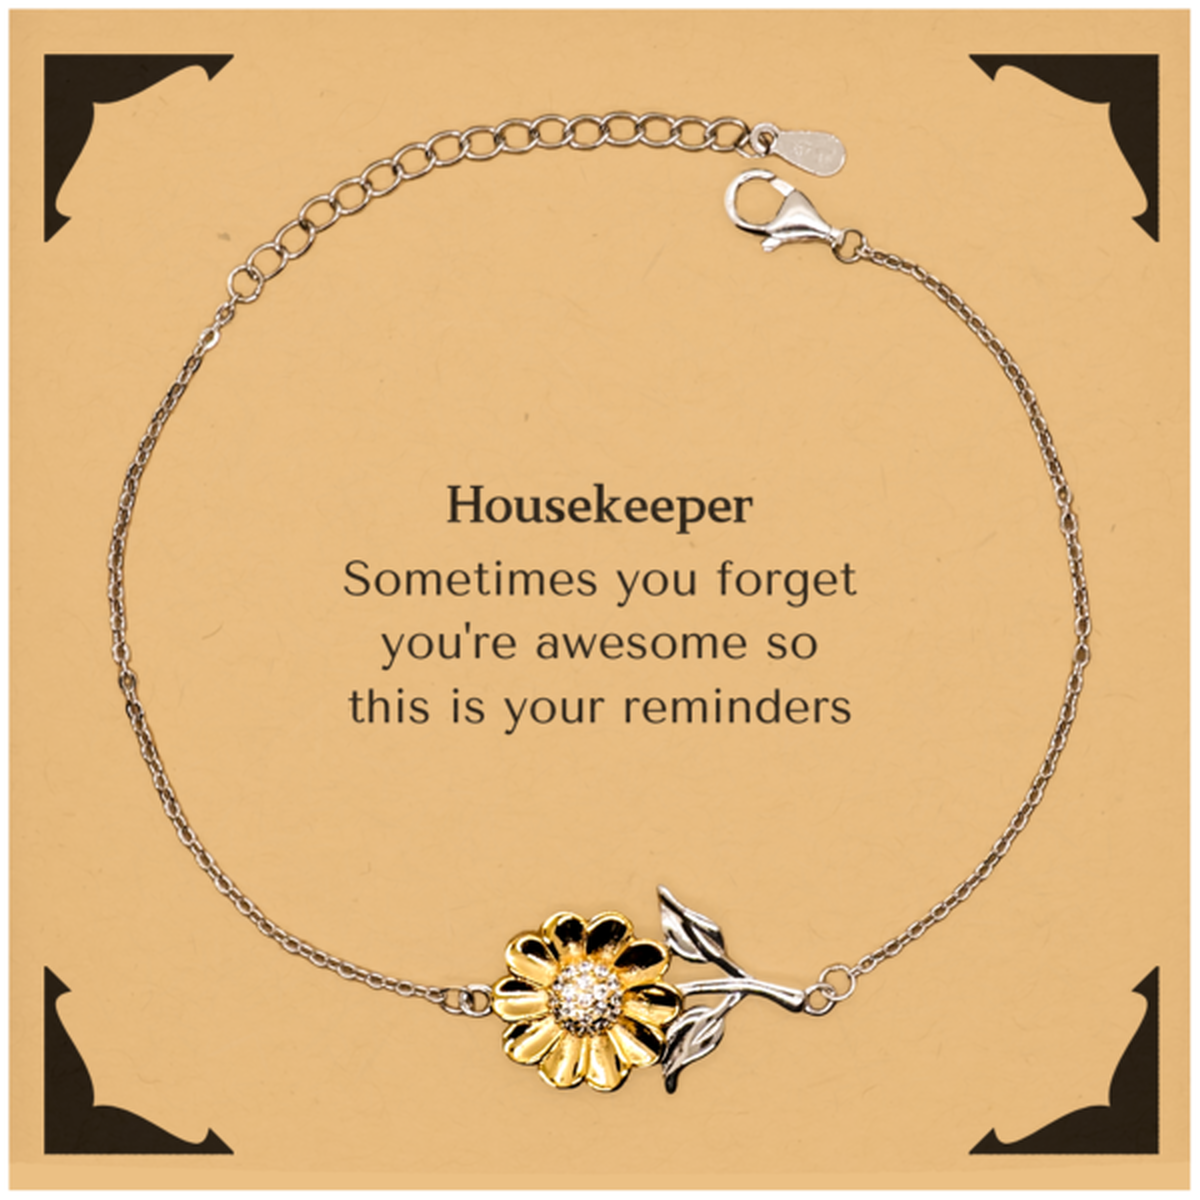 Sentimental Housekeeper Sunflower Bracelet, Housekeeper Sometimes you forget you're awesome so this is your reminders, Graduation Christmas Birthday Gifts for Housekeeper, Men, Women, Coworkers